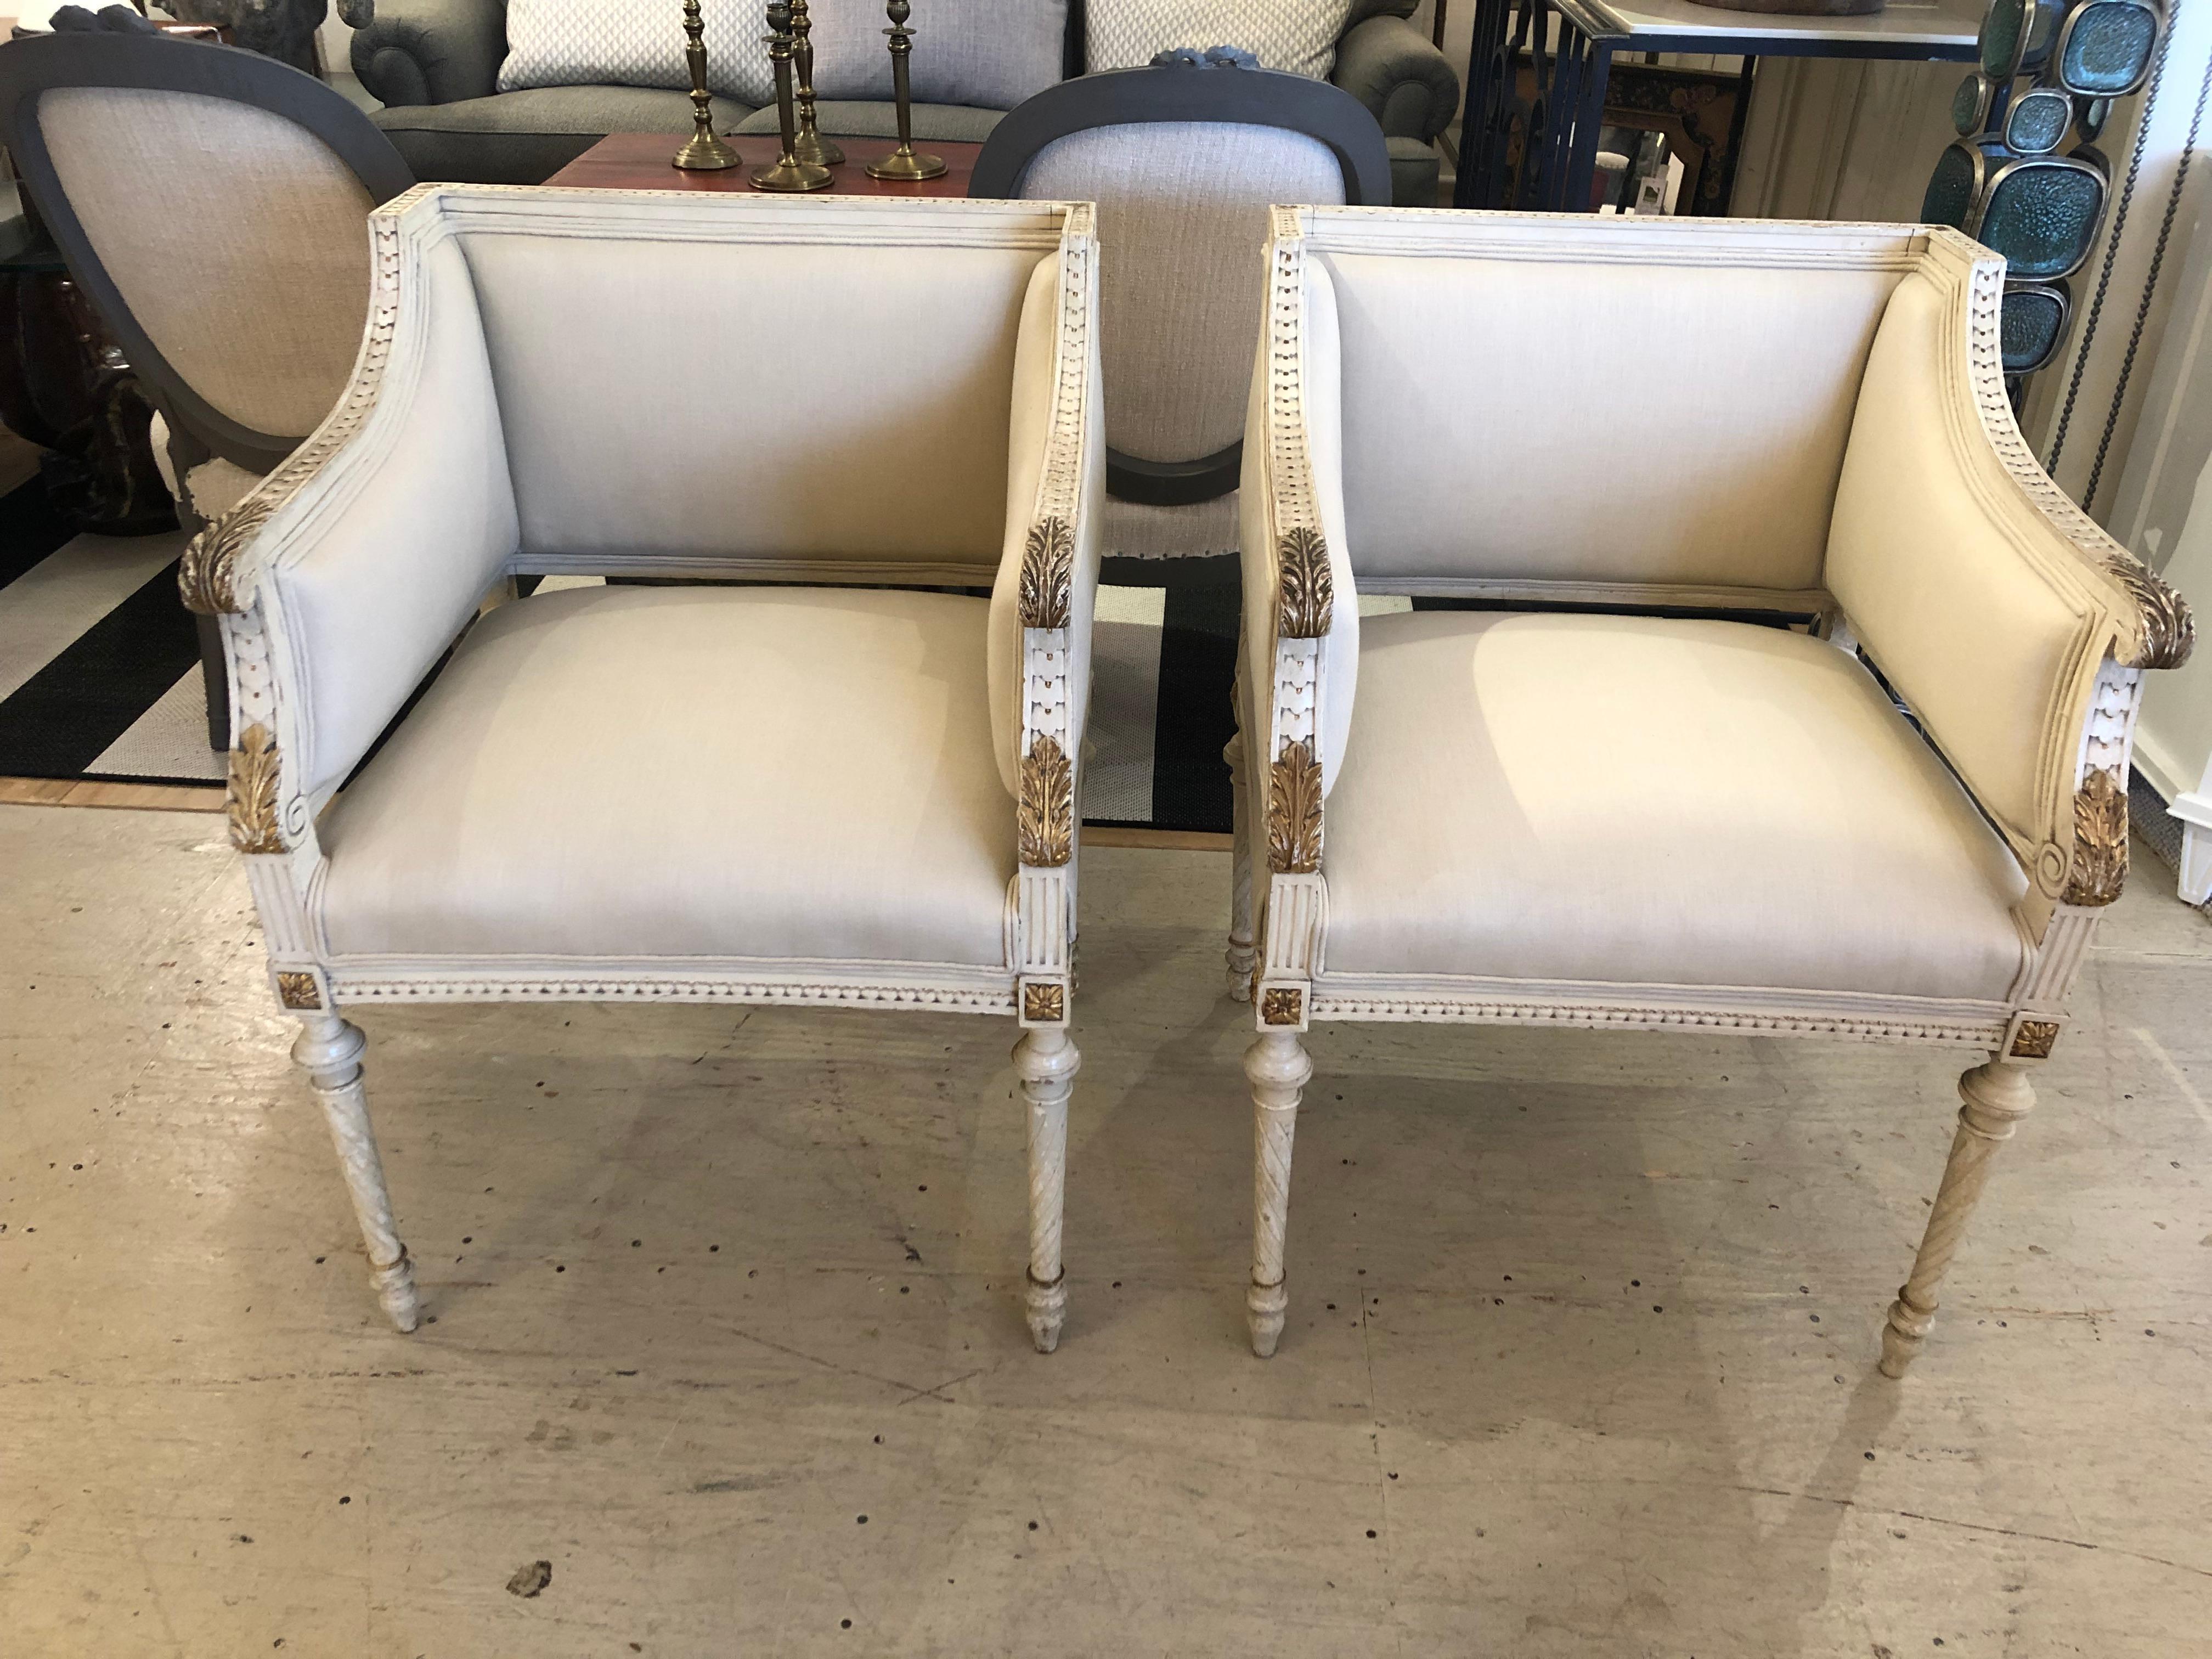 Superb elegant pair of comfortable Paris club chairs having a rare square shape, beautiful carved wood frames with original early paint and gilded details. Newly upholstered in off white linen. Incredible from every angle.
arm height 28